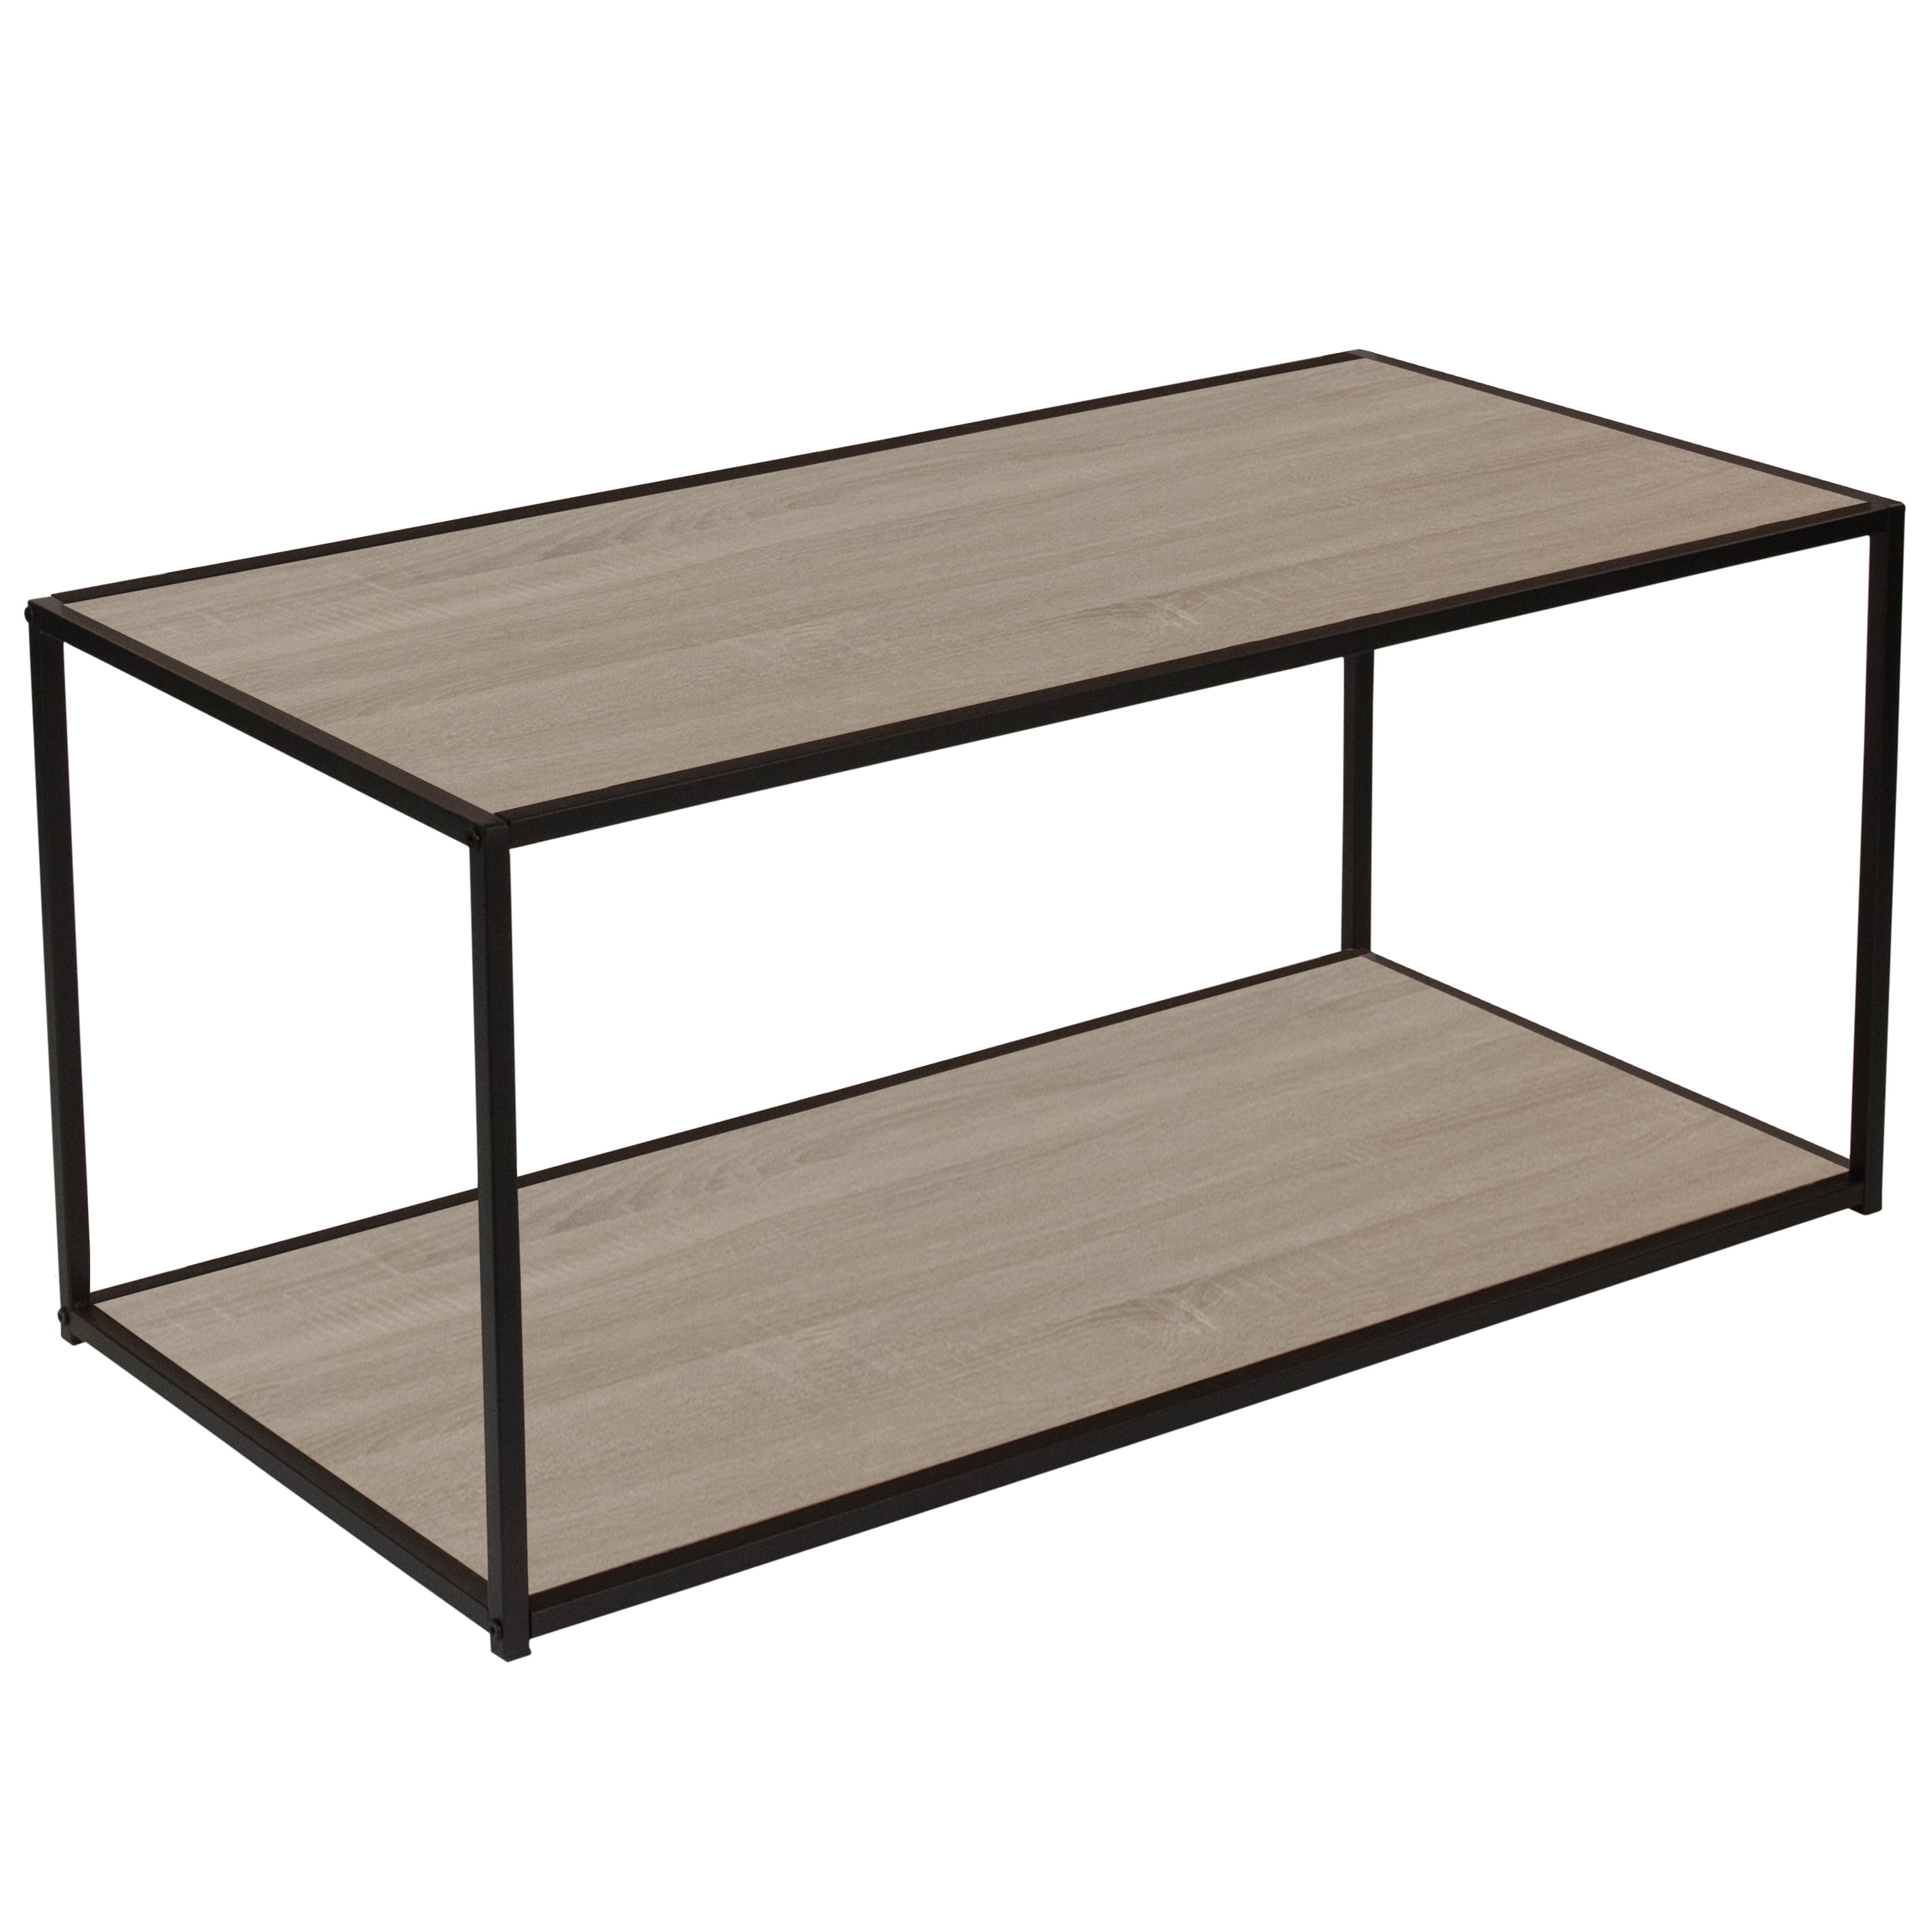 Flash Furniture Midtown Collection Sonoma Oak Wood Grain Finish End Table with Black Metal Frame